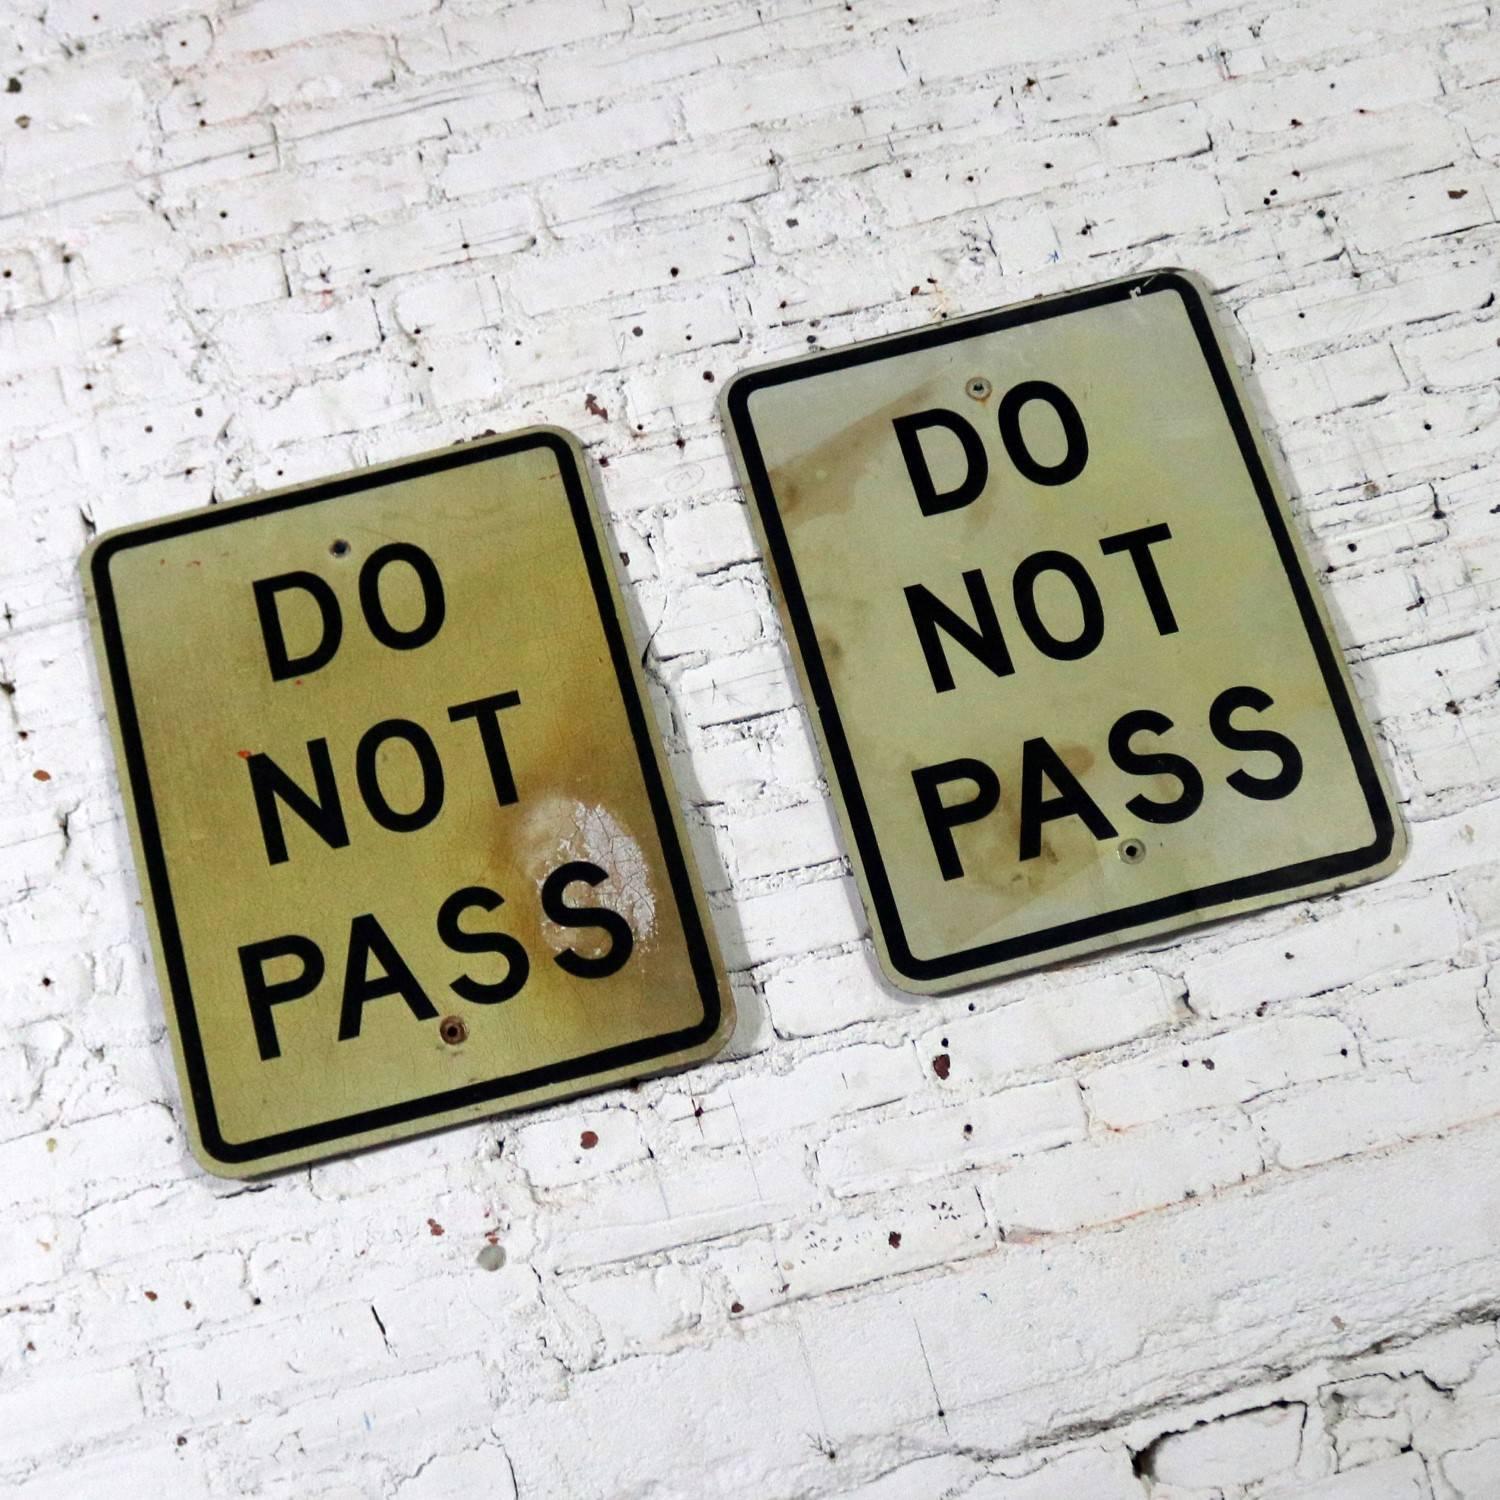 Cool vintage “Do Not Pass” metal traffic signs. We have two offered and have priced them individually. These are in wonderful vintage condition made of aluminium with all the great patina provided from years of use. Select #1 or #2 or both, circa